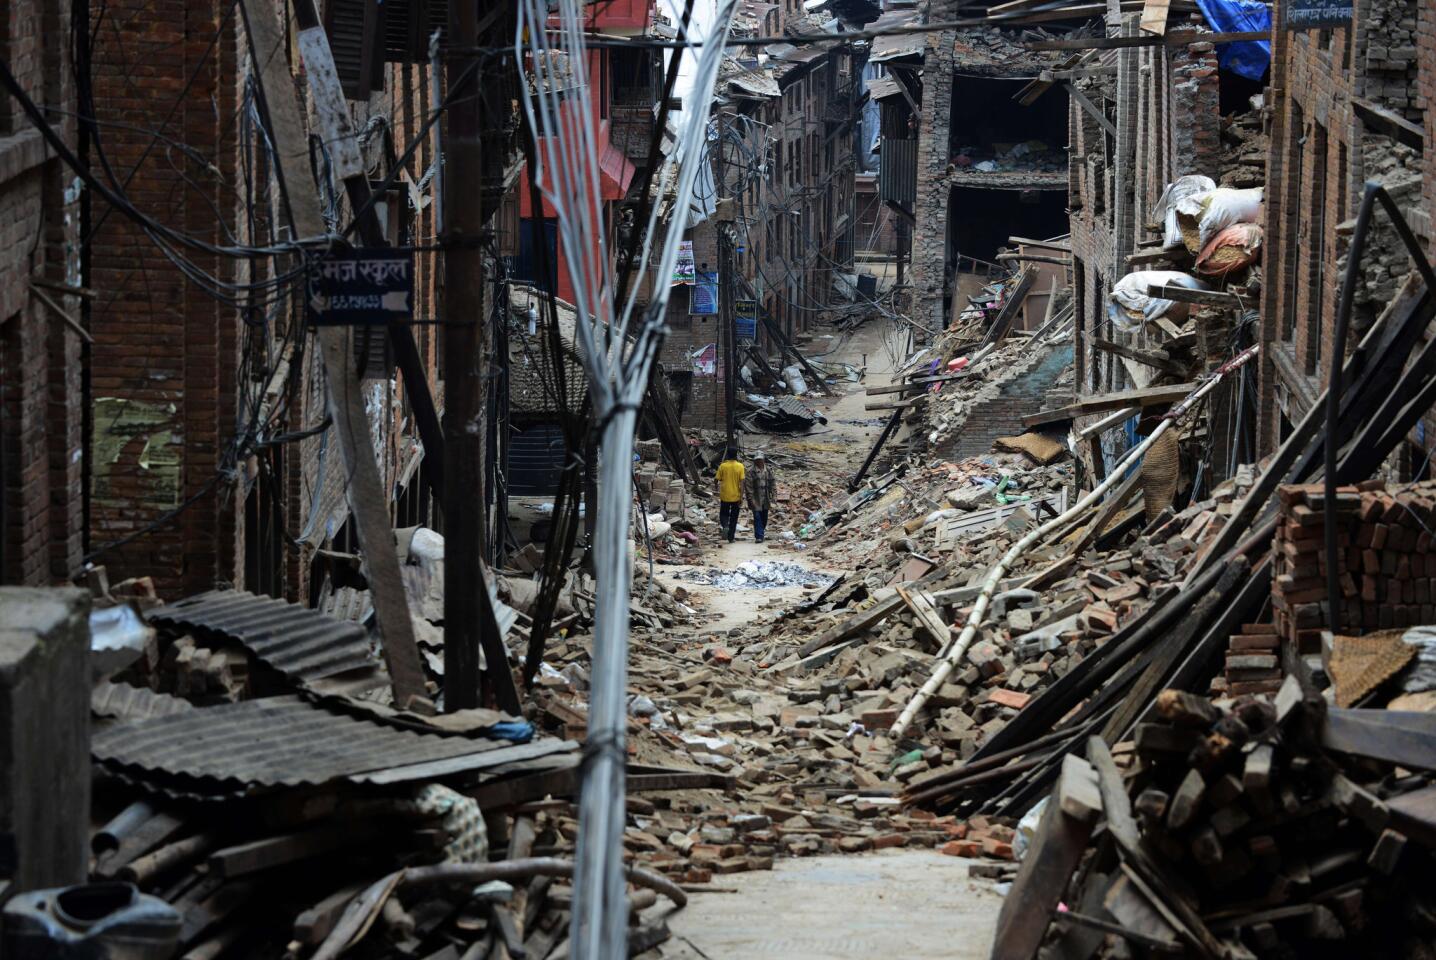 Nepalese residents walks past damaged houses following an earthquake in Bhaktapur on the outskirts of Kathmandu on May 13, 2015.